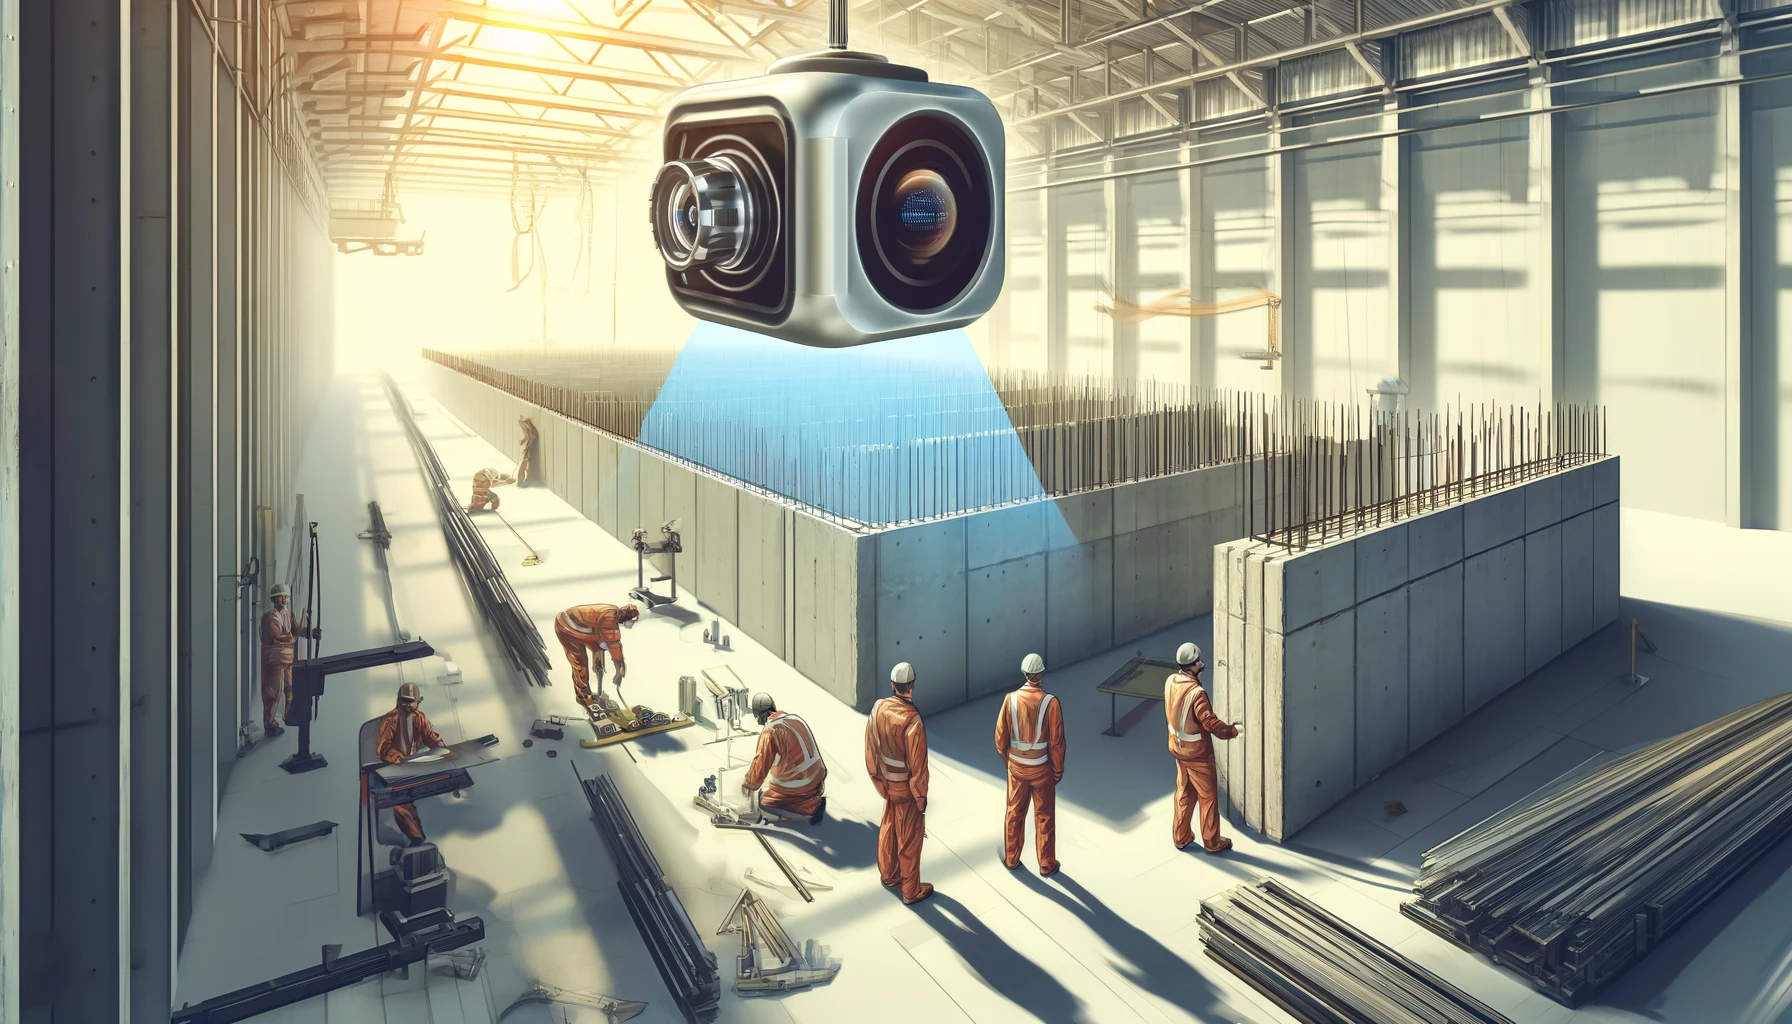 Here's the illustration for the article about the construction company's use of an AI tool for precast panel inspections. It depicts a dynamic scene within a construction facility, with workers and an AI-equipped overhead camera examining the panels. The composition is balanced with warm and cool tones, engaging the viewer with the interaction between the workers and technology.